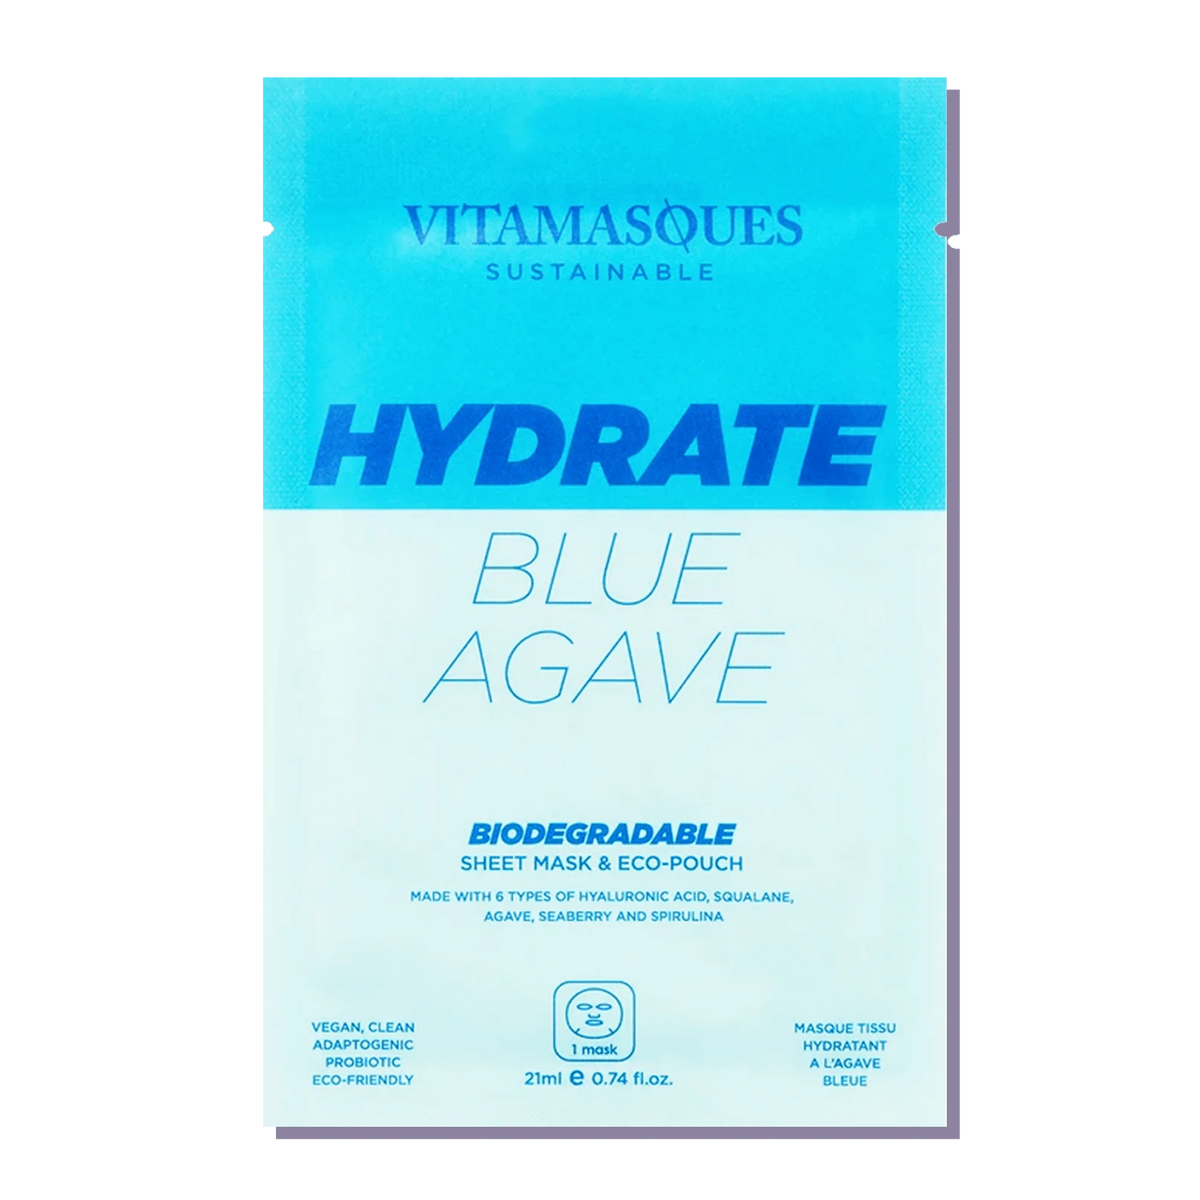 Hydrate Blue Agave Biodegradable Face Sheet Mask